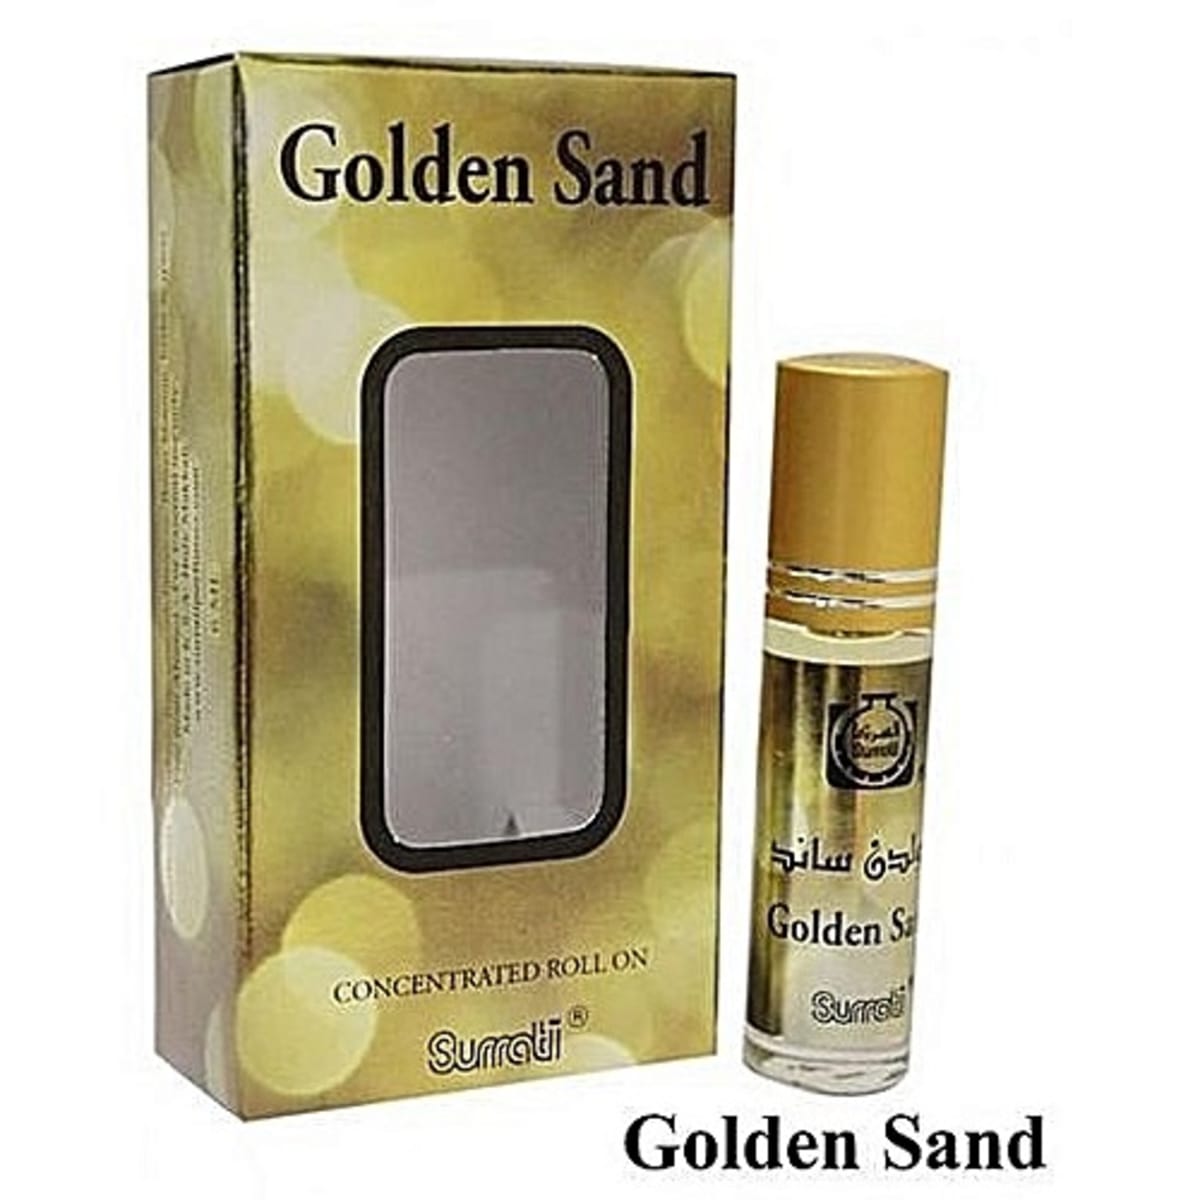 Golden Sand by Surrati Perfume Oil perfume without alcohol - Oriental-Style